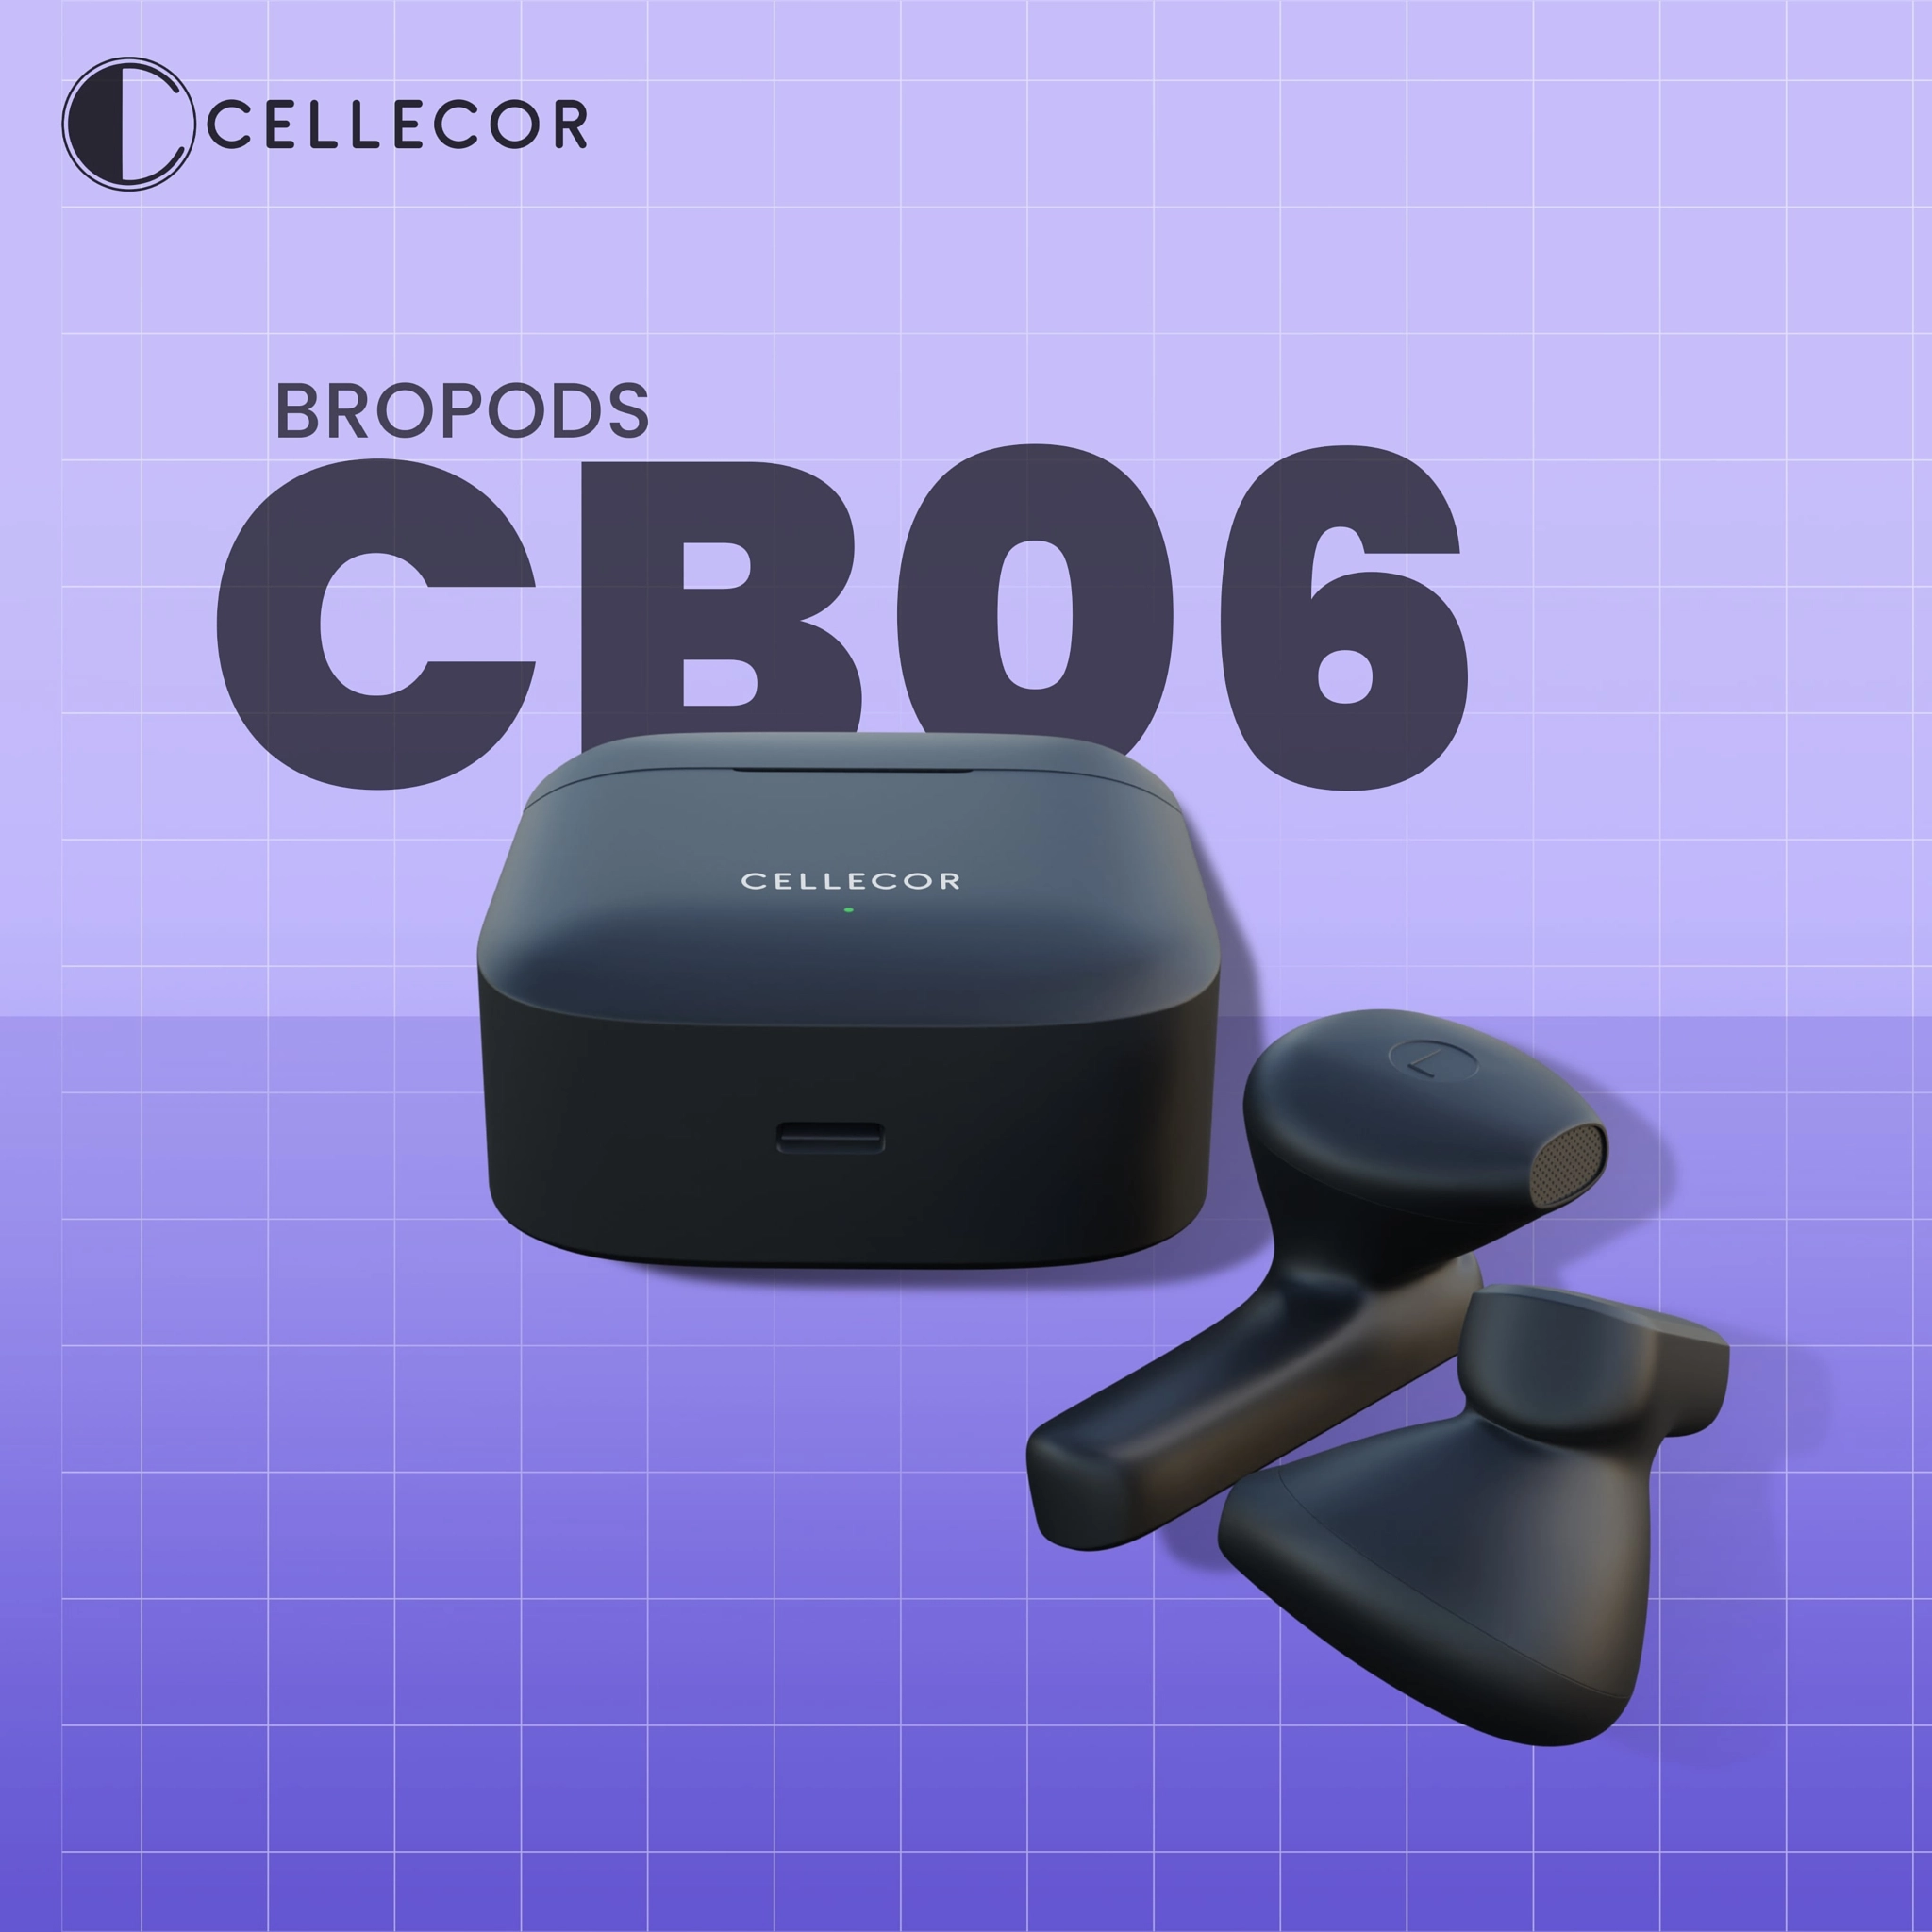 Cellecor Bropods CB06 Best Truly Wireless Earbuds